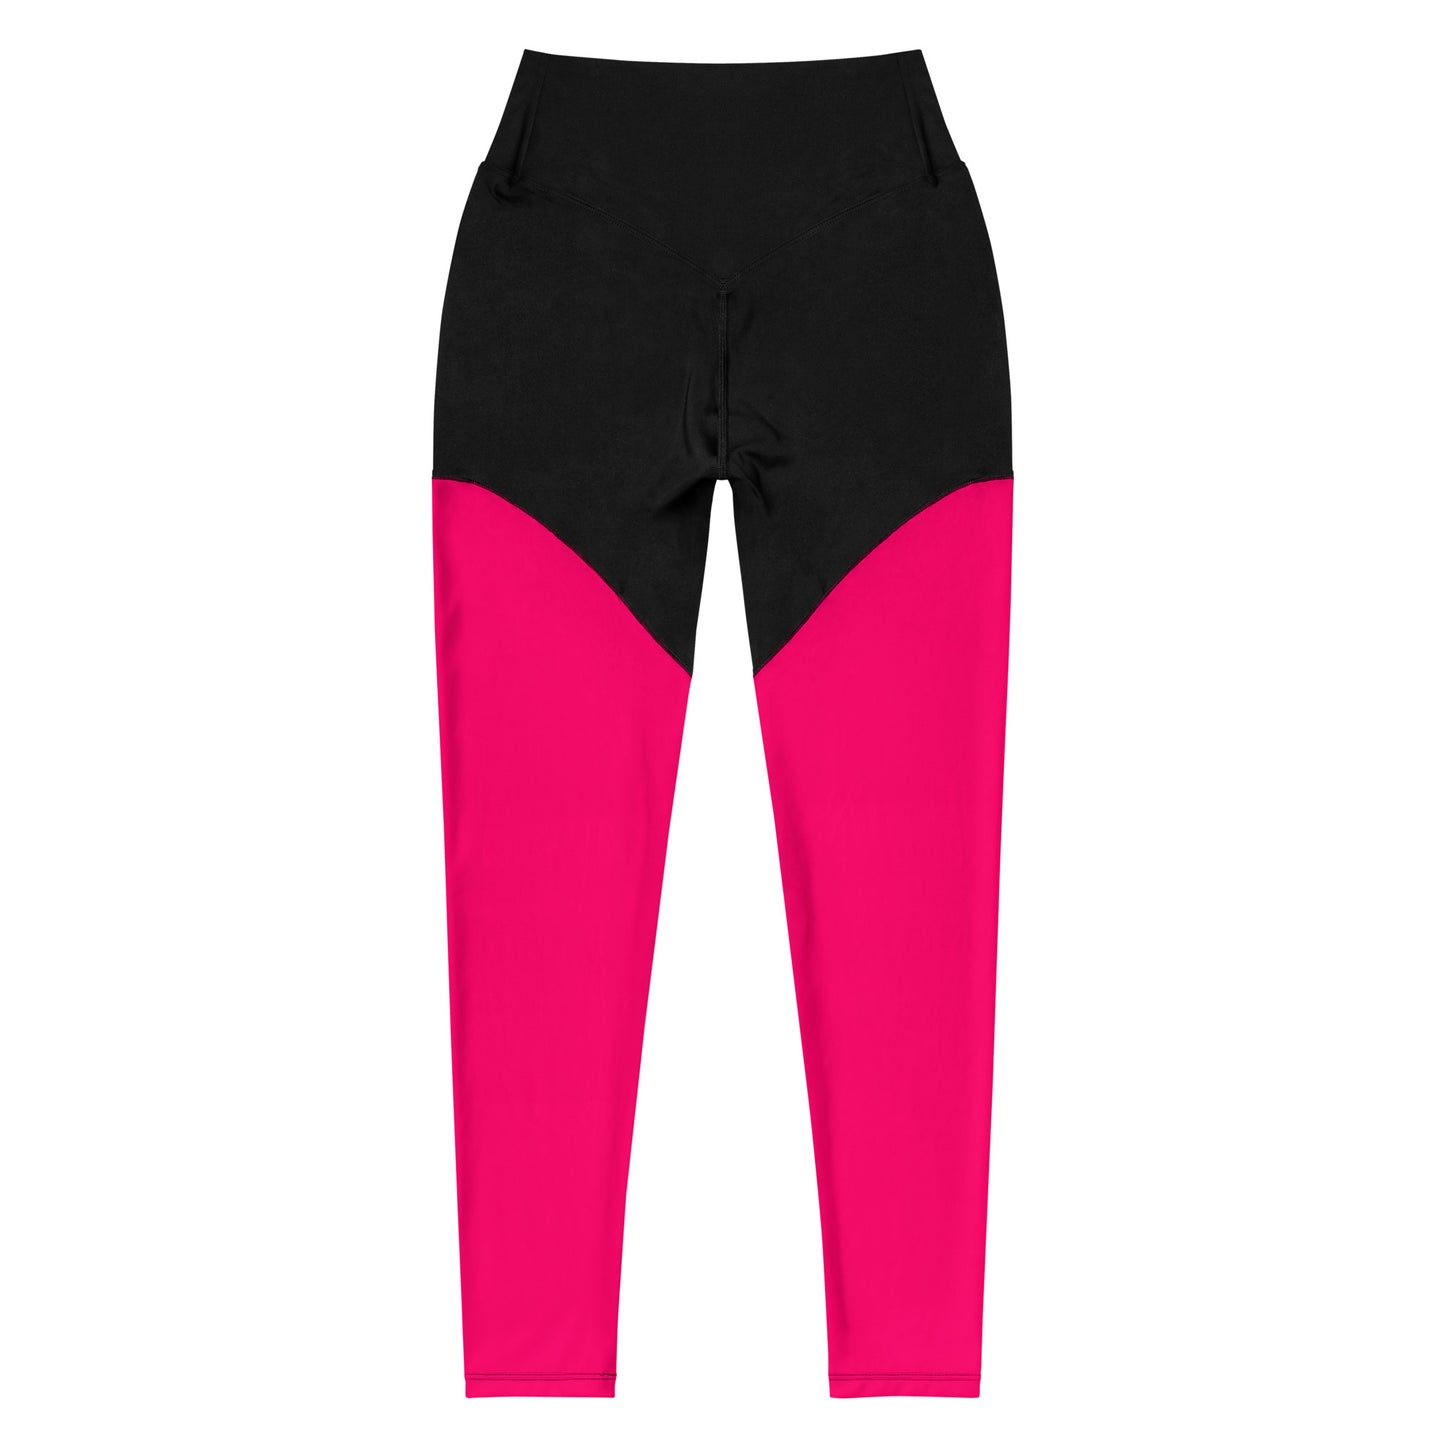 Spark Women’s High-Waisted Sports Leggings - Pink Punch